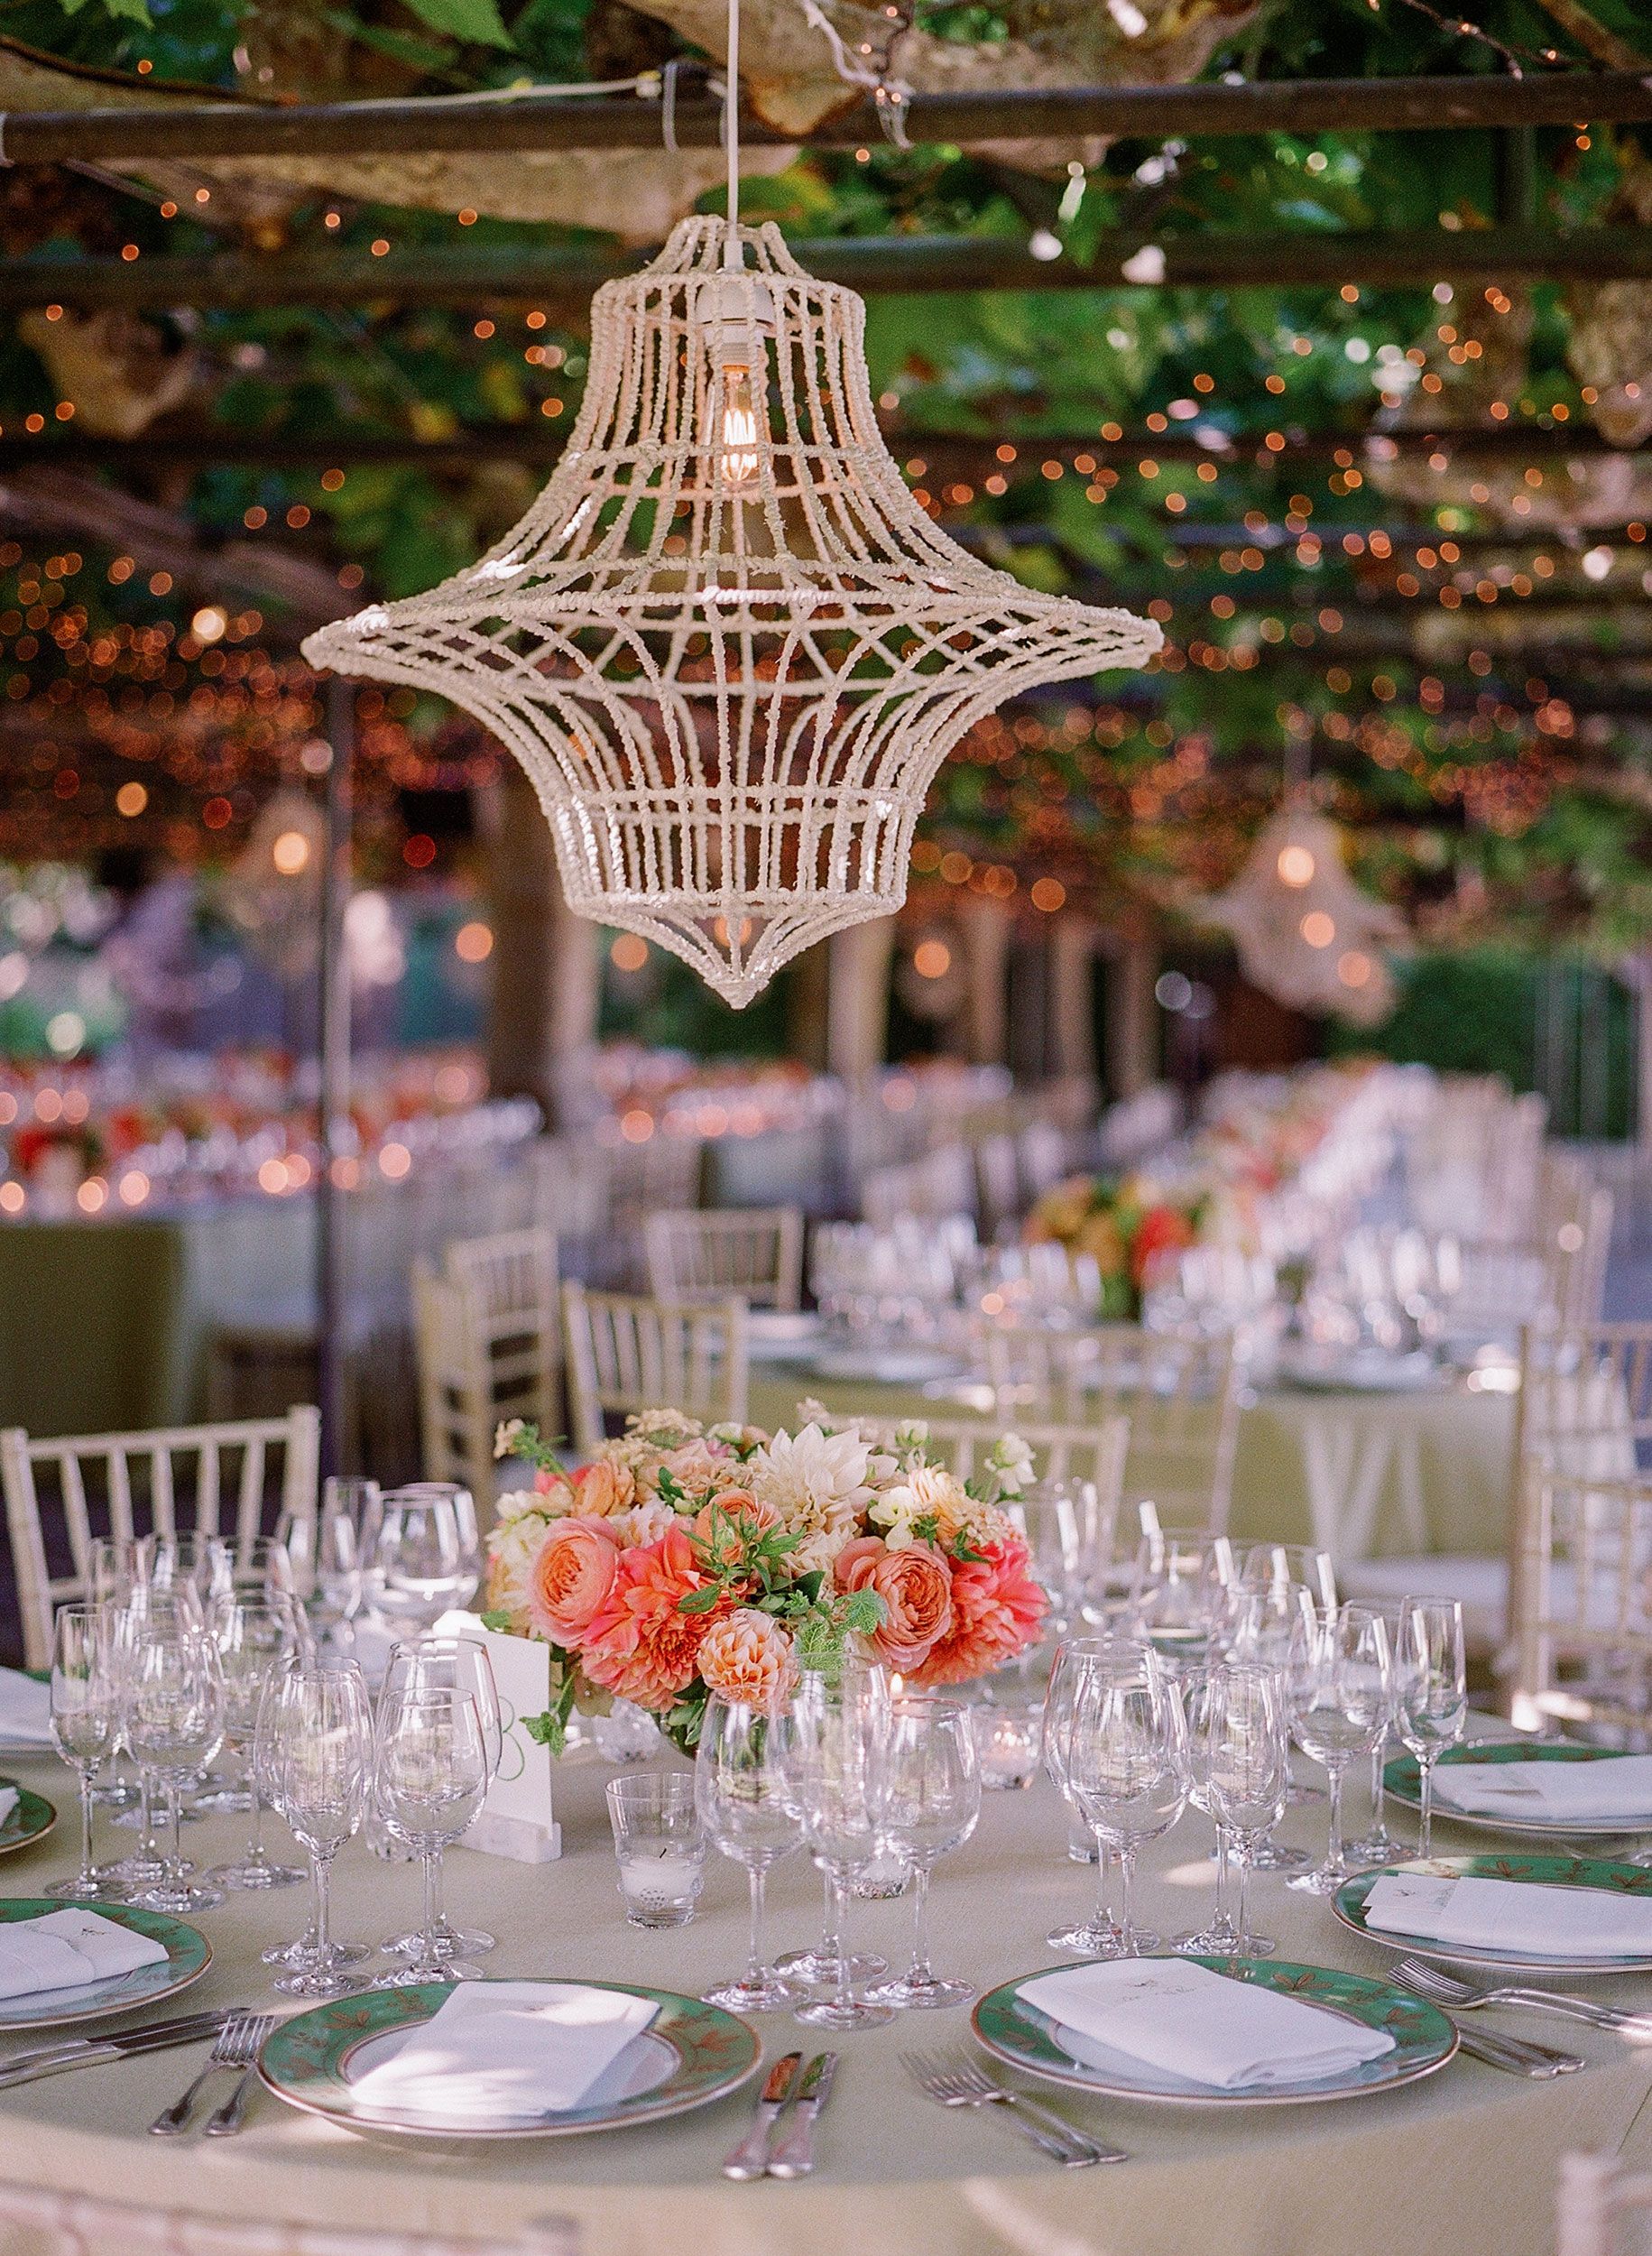 10 Ways Wedding Ceiling Decorations Will Wow Your Guests - PartySlate